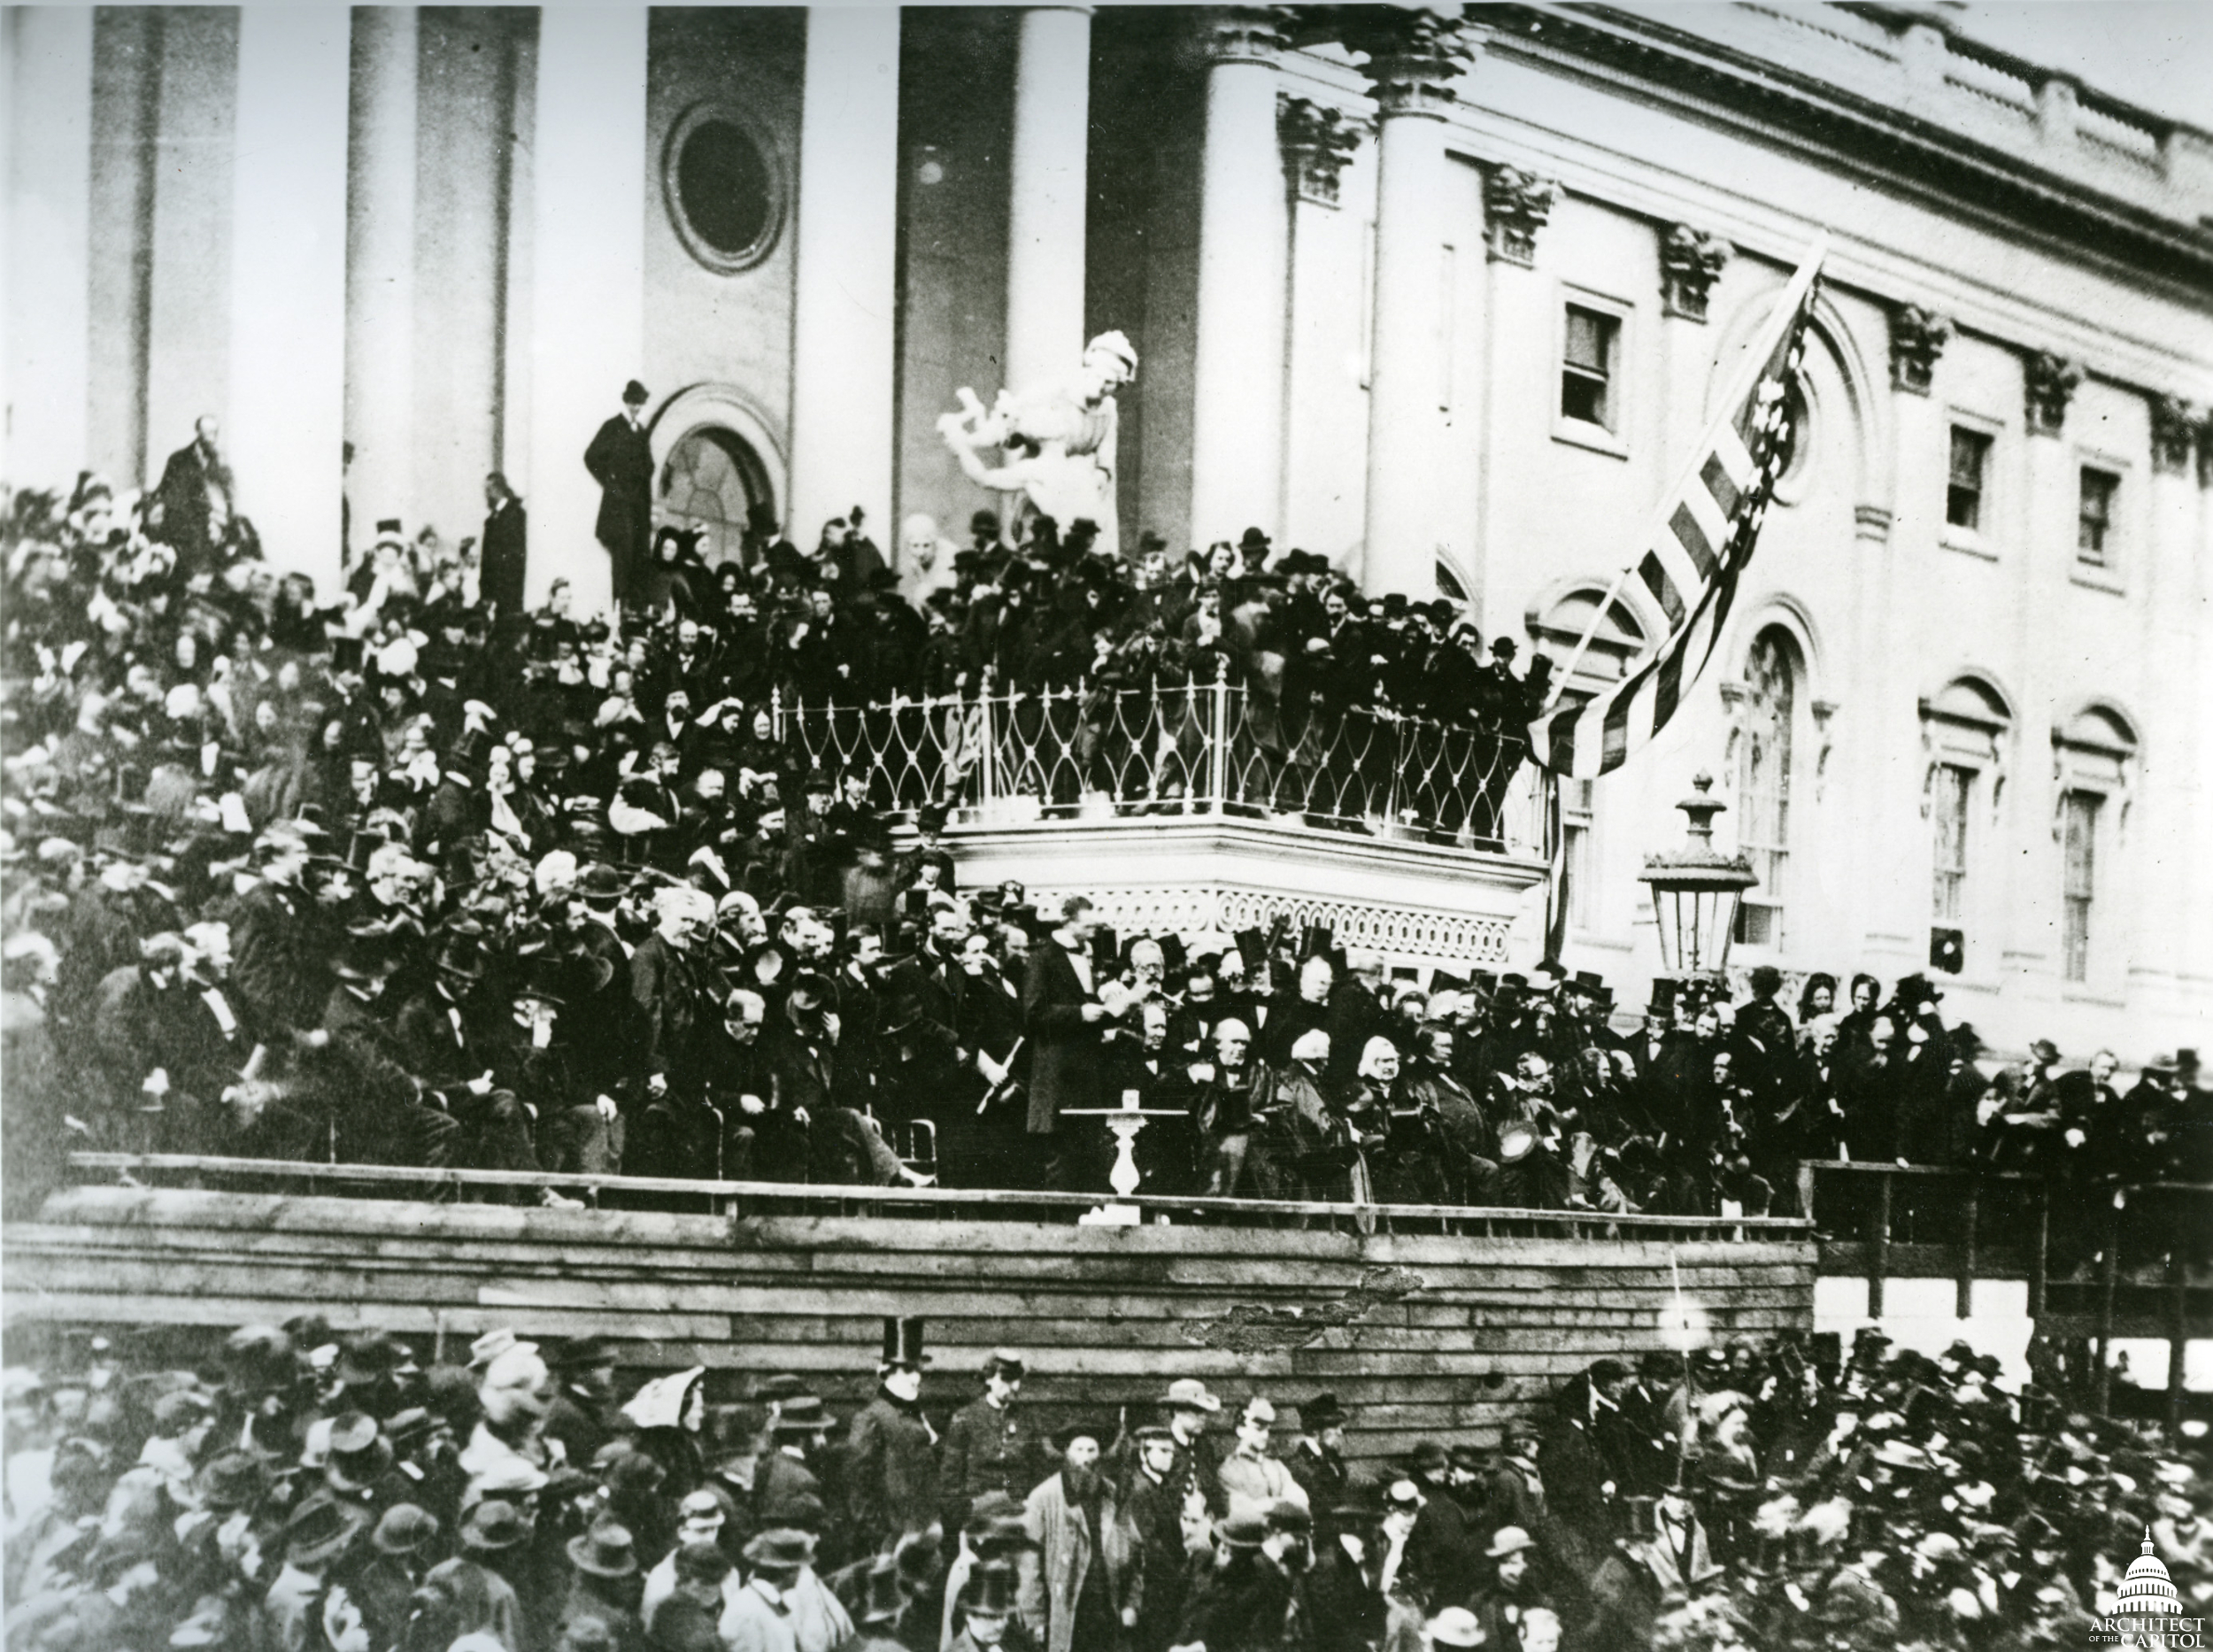 President Abraham Lincoln's inauguration at the U.S. Capitol 1865.